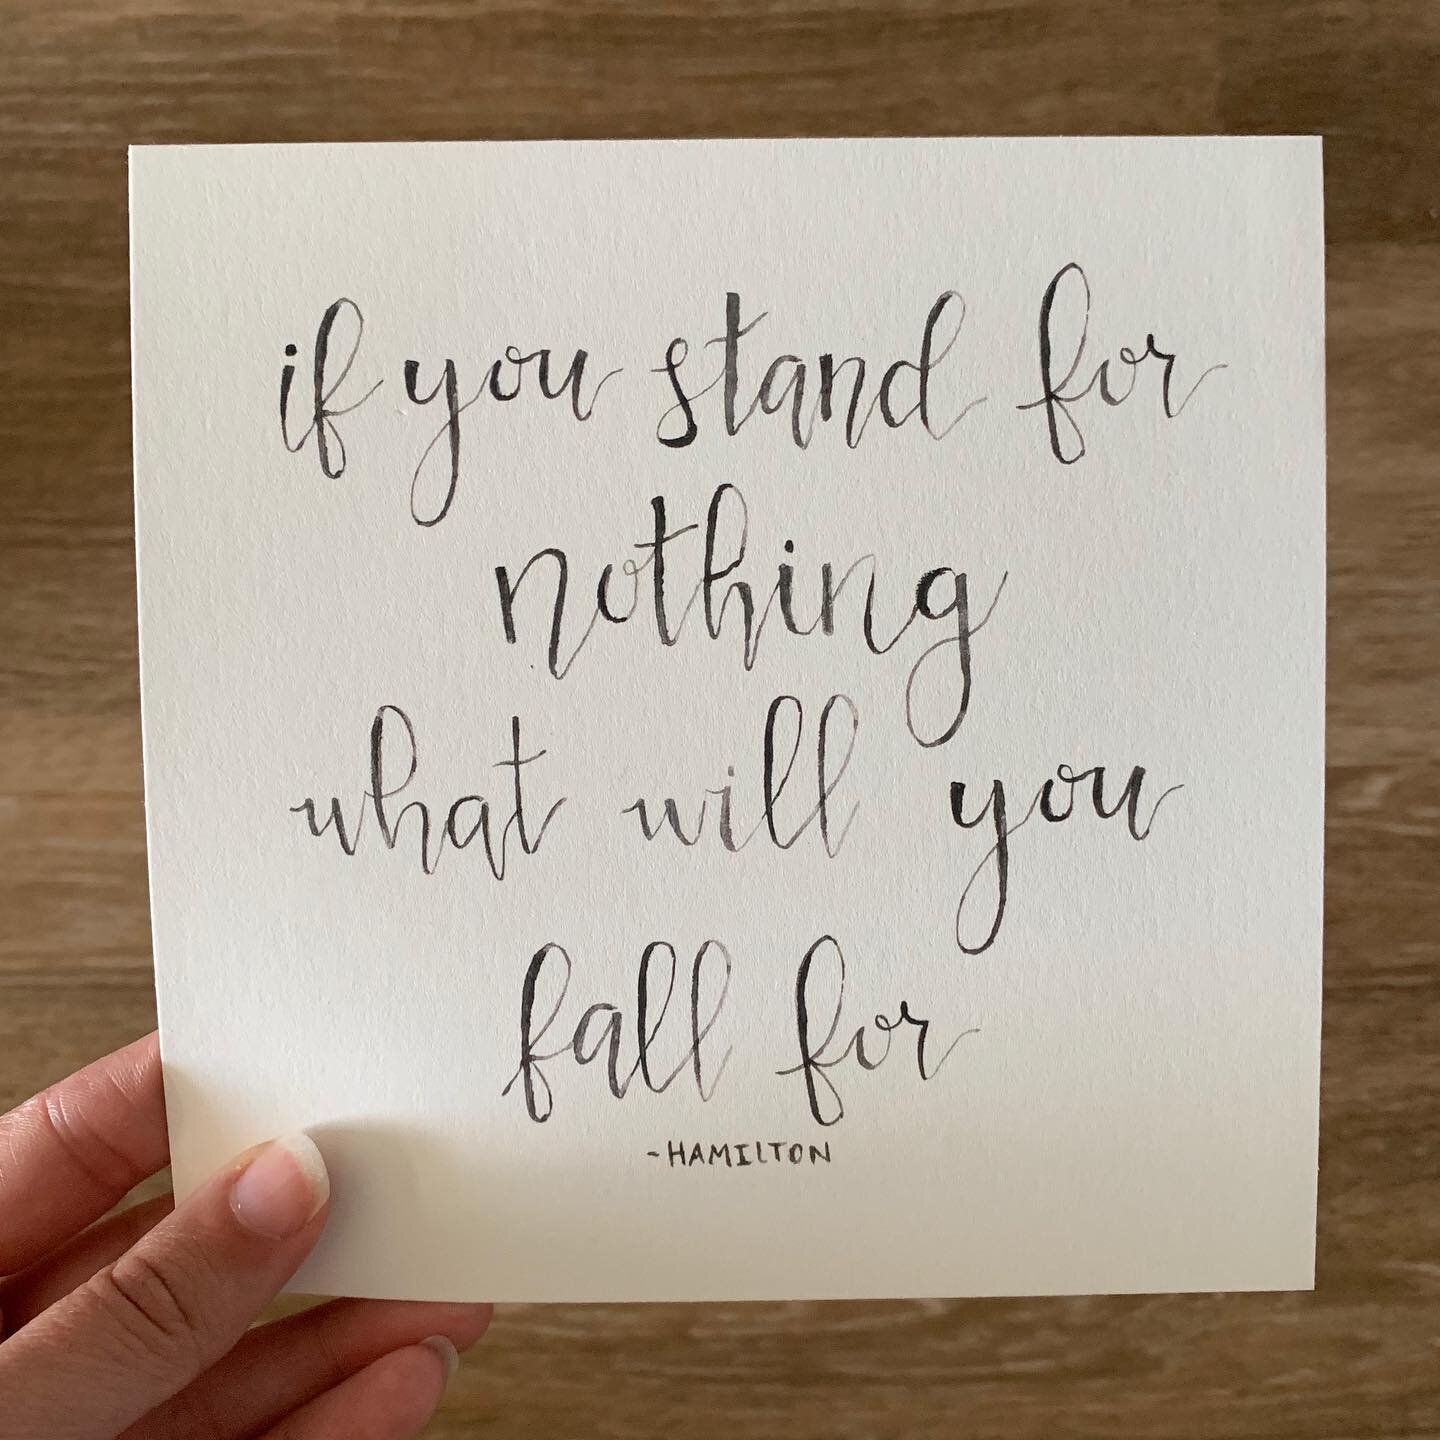 &ldquo;If you stand for nothing, what will you fall for&rdquo; &bull;
These words have been in my head since I listened to the Hamilton soundtrack for the first time. They stuck with me. It&rsquo;s time we all stand for what is right. I am here to li